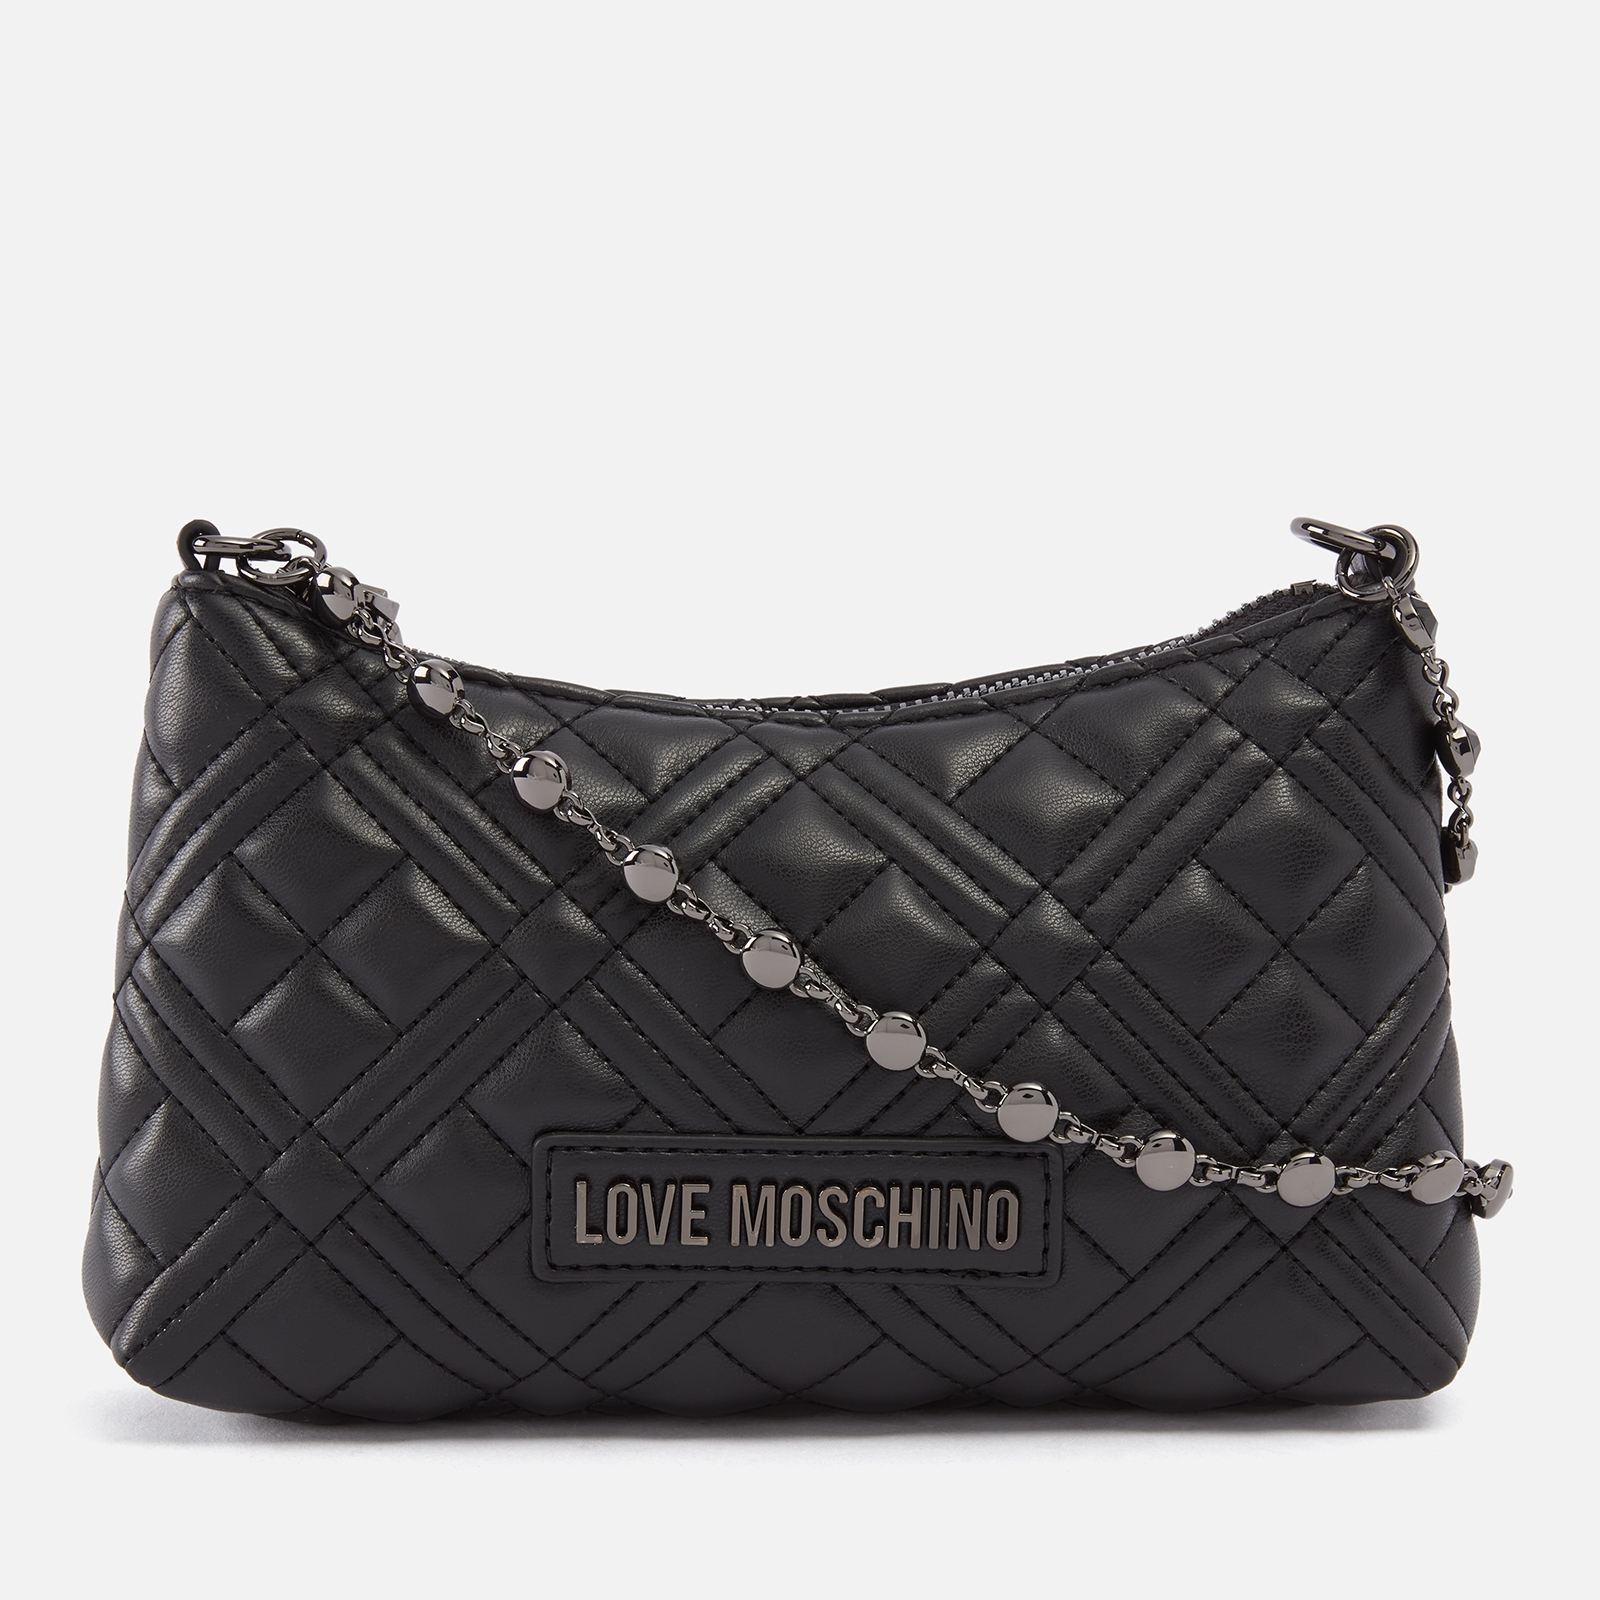 Love Moschino Borsa Quilted Faux Leather Shoulder Bag von Love Moschino